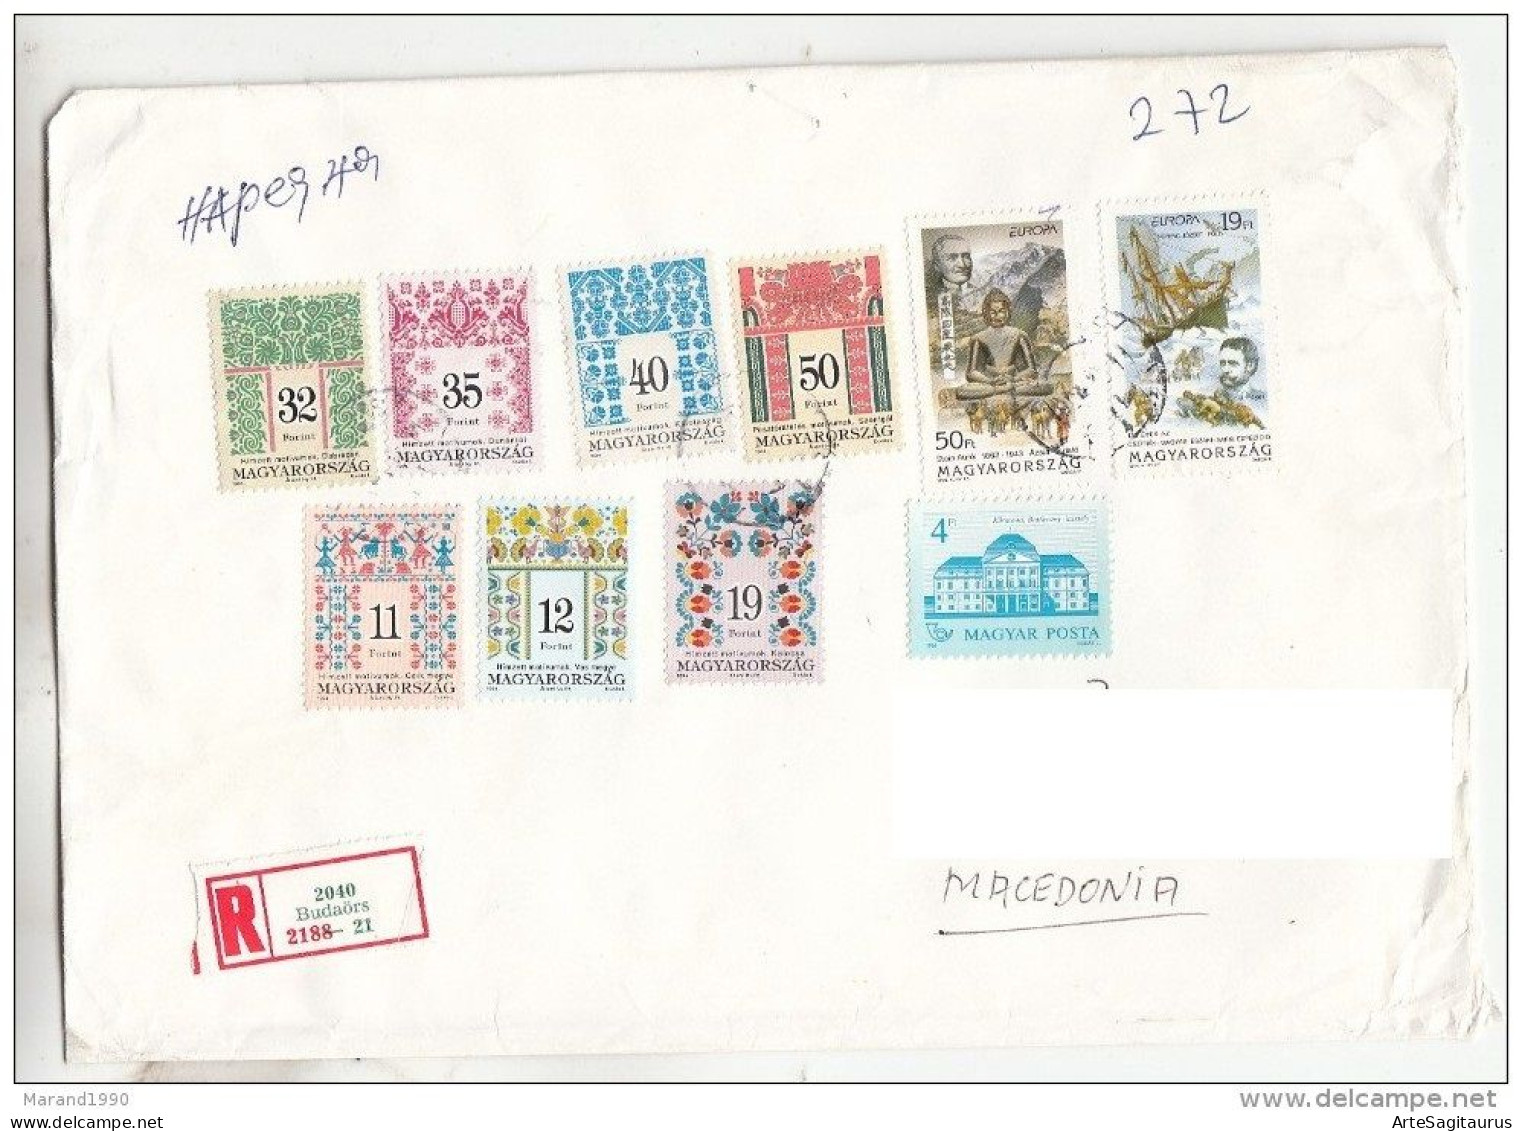 HUNGARY, R-COVER, REPUBLIC OF MACEDONIA, (008) - Covers & Documents